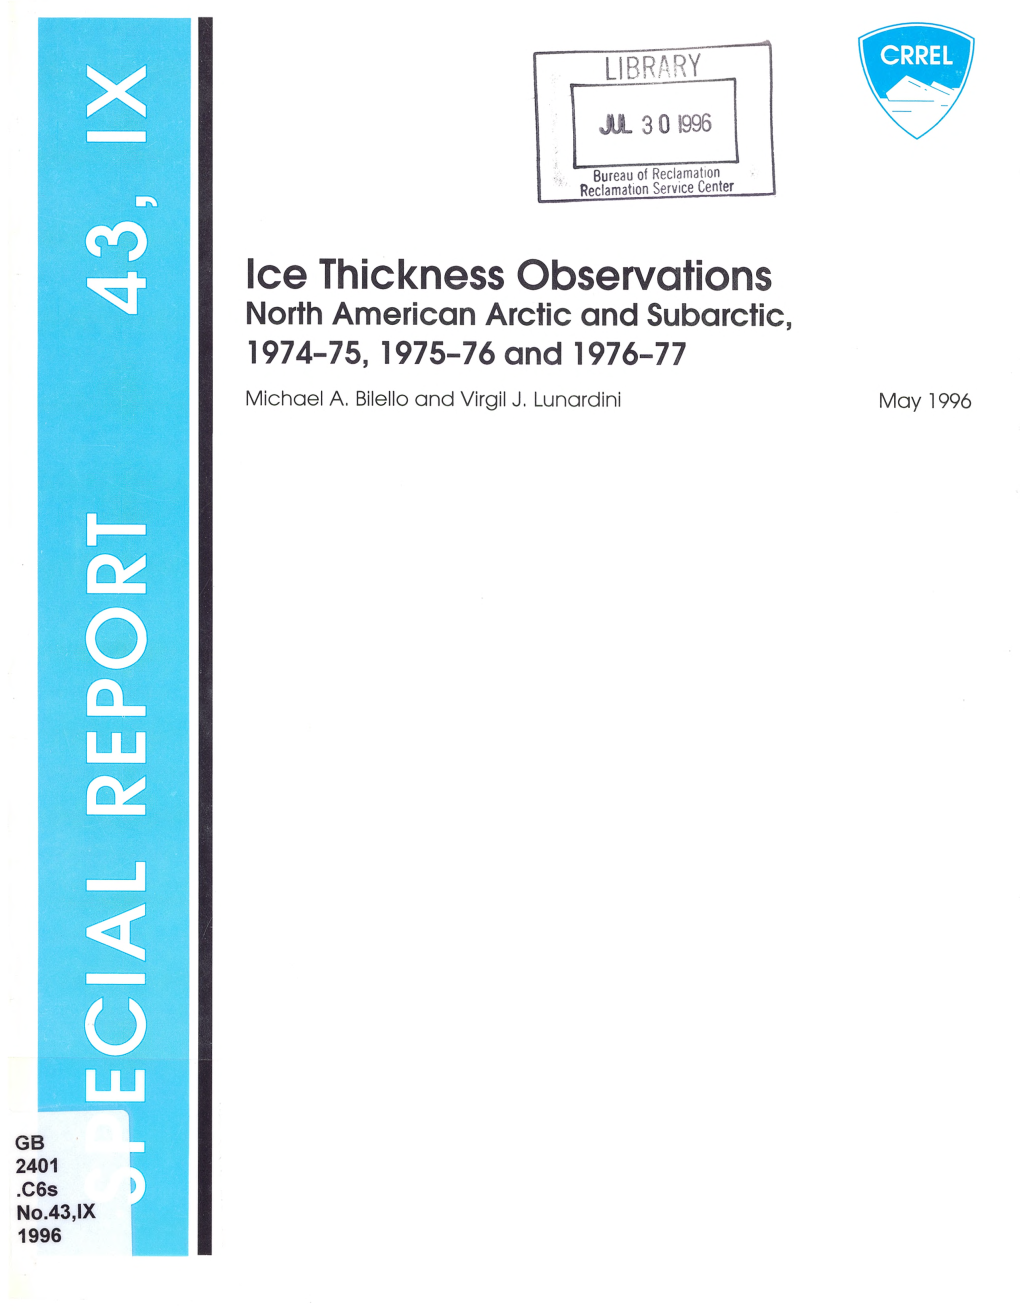 Ice Thickness Observations, North American Arctic and Subarctic, 1974